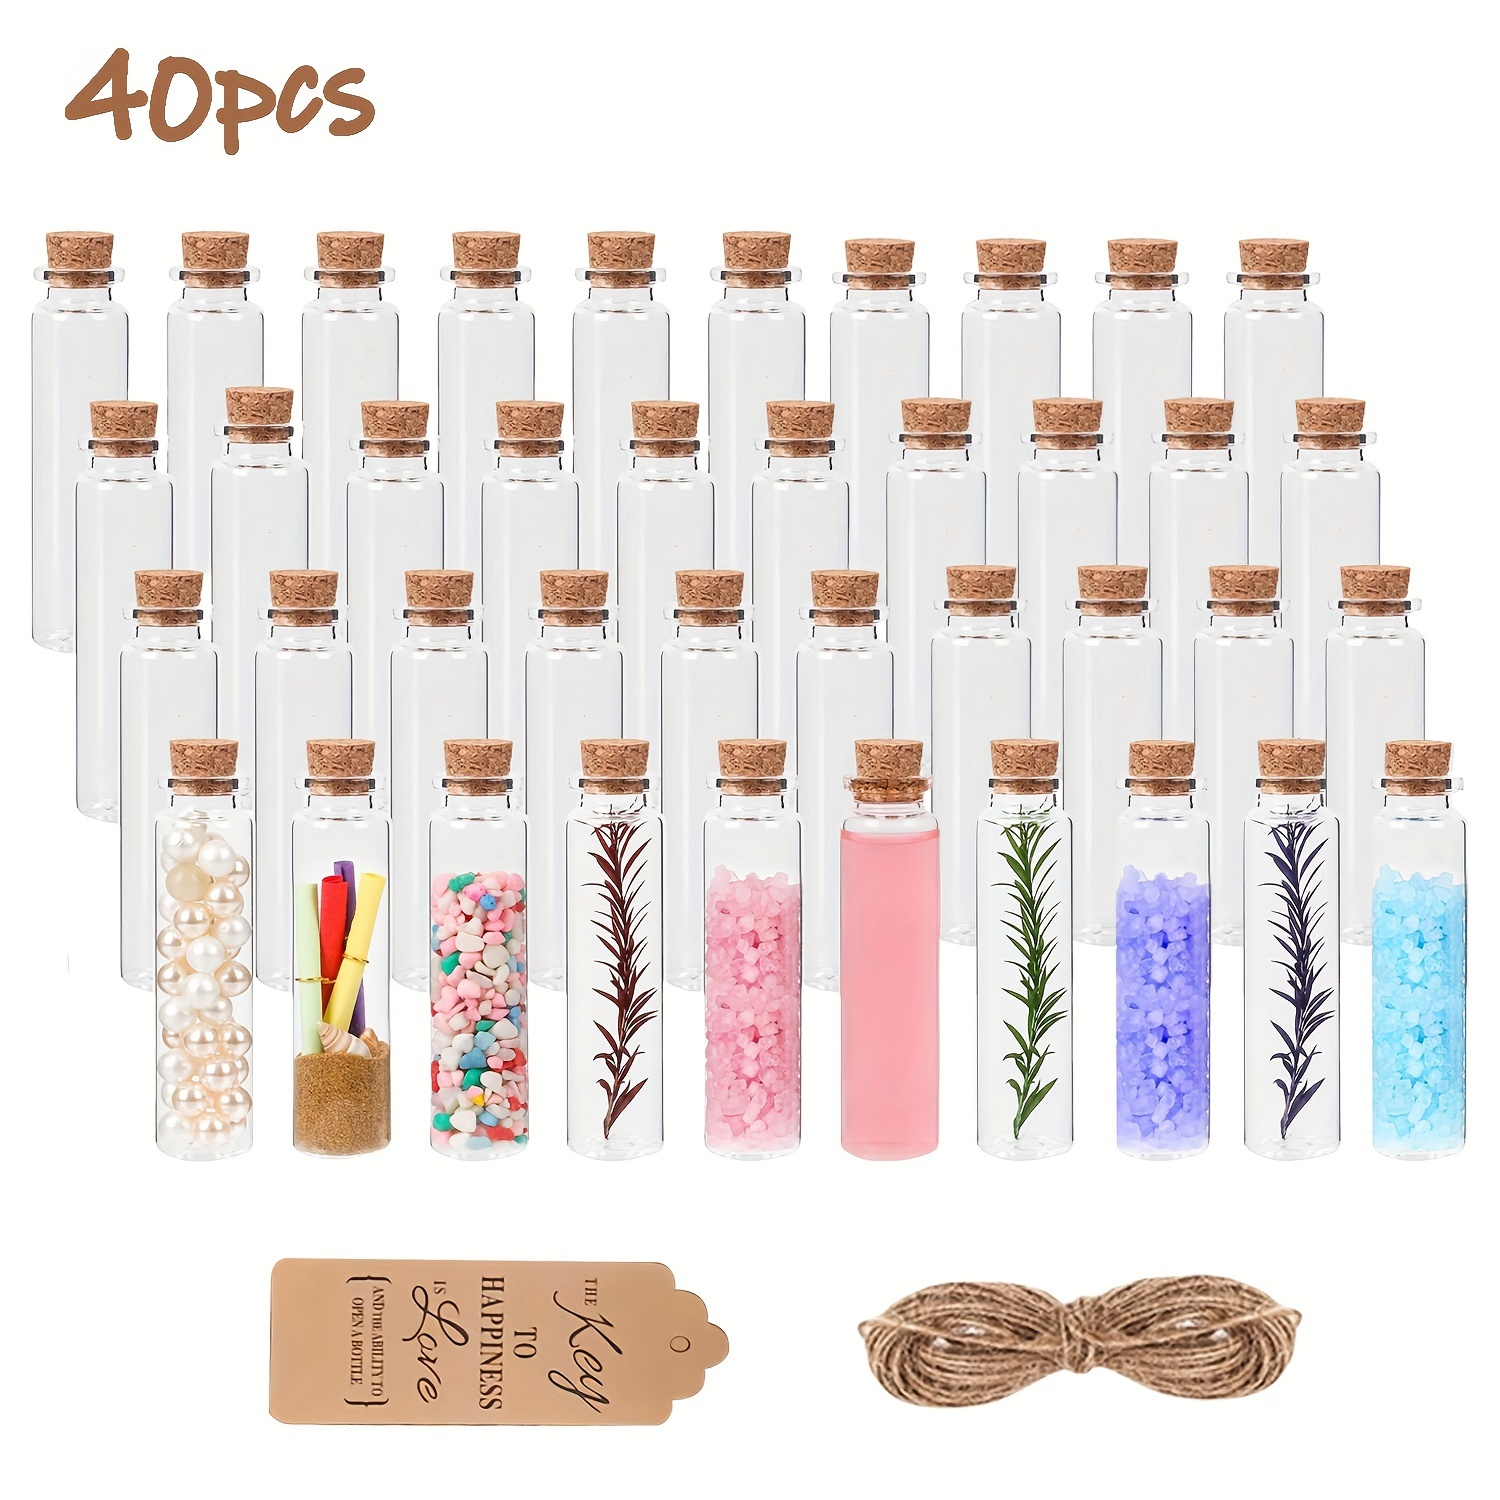 

40pcs Cork Glass Bottle, Diy Decoration Mini Potion Bottles, Wishing Bottle Assembly Set, Mother's Day Wedding Valentine New Year Party Supplies (with Rope Card)